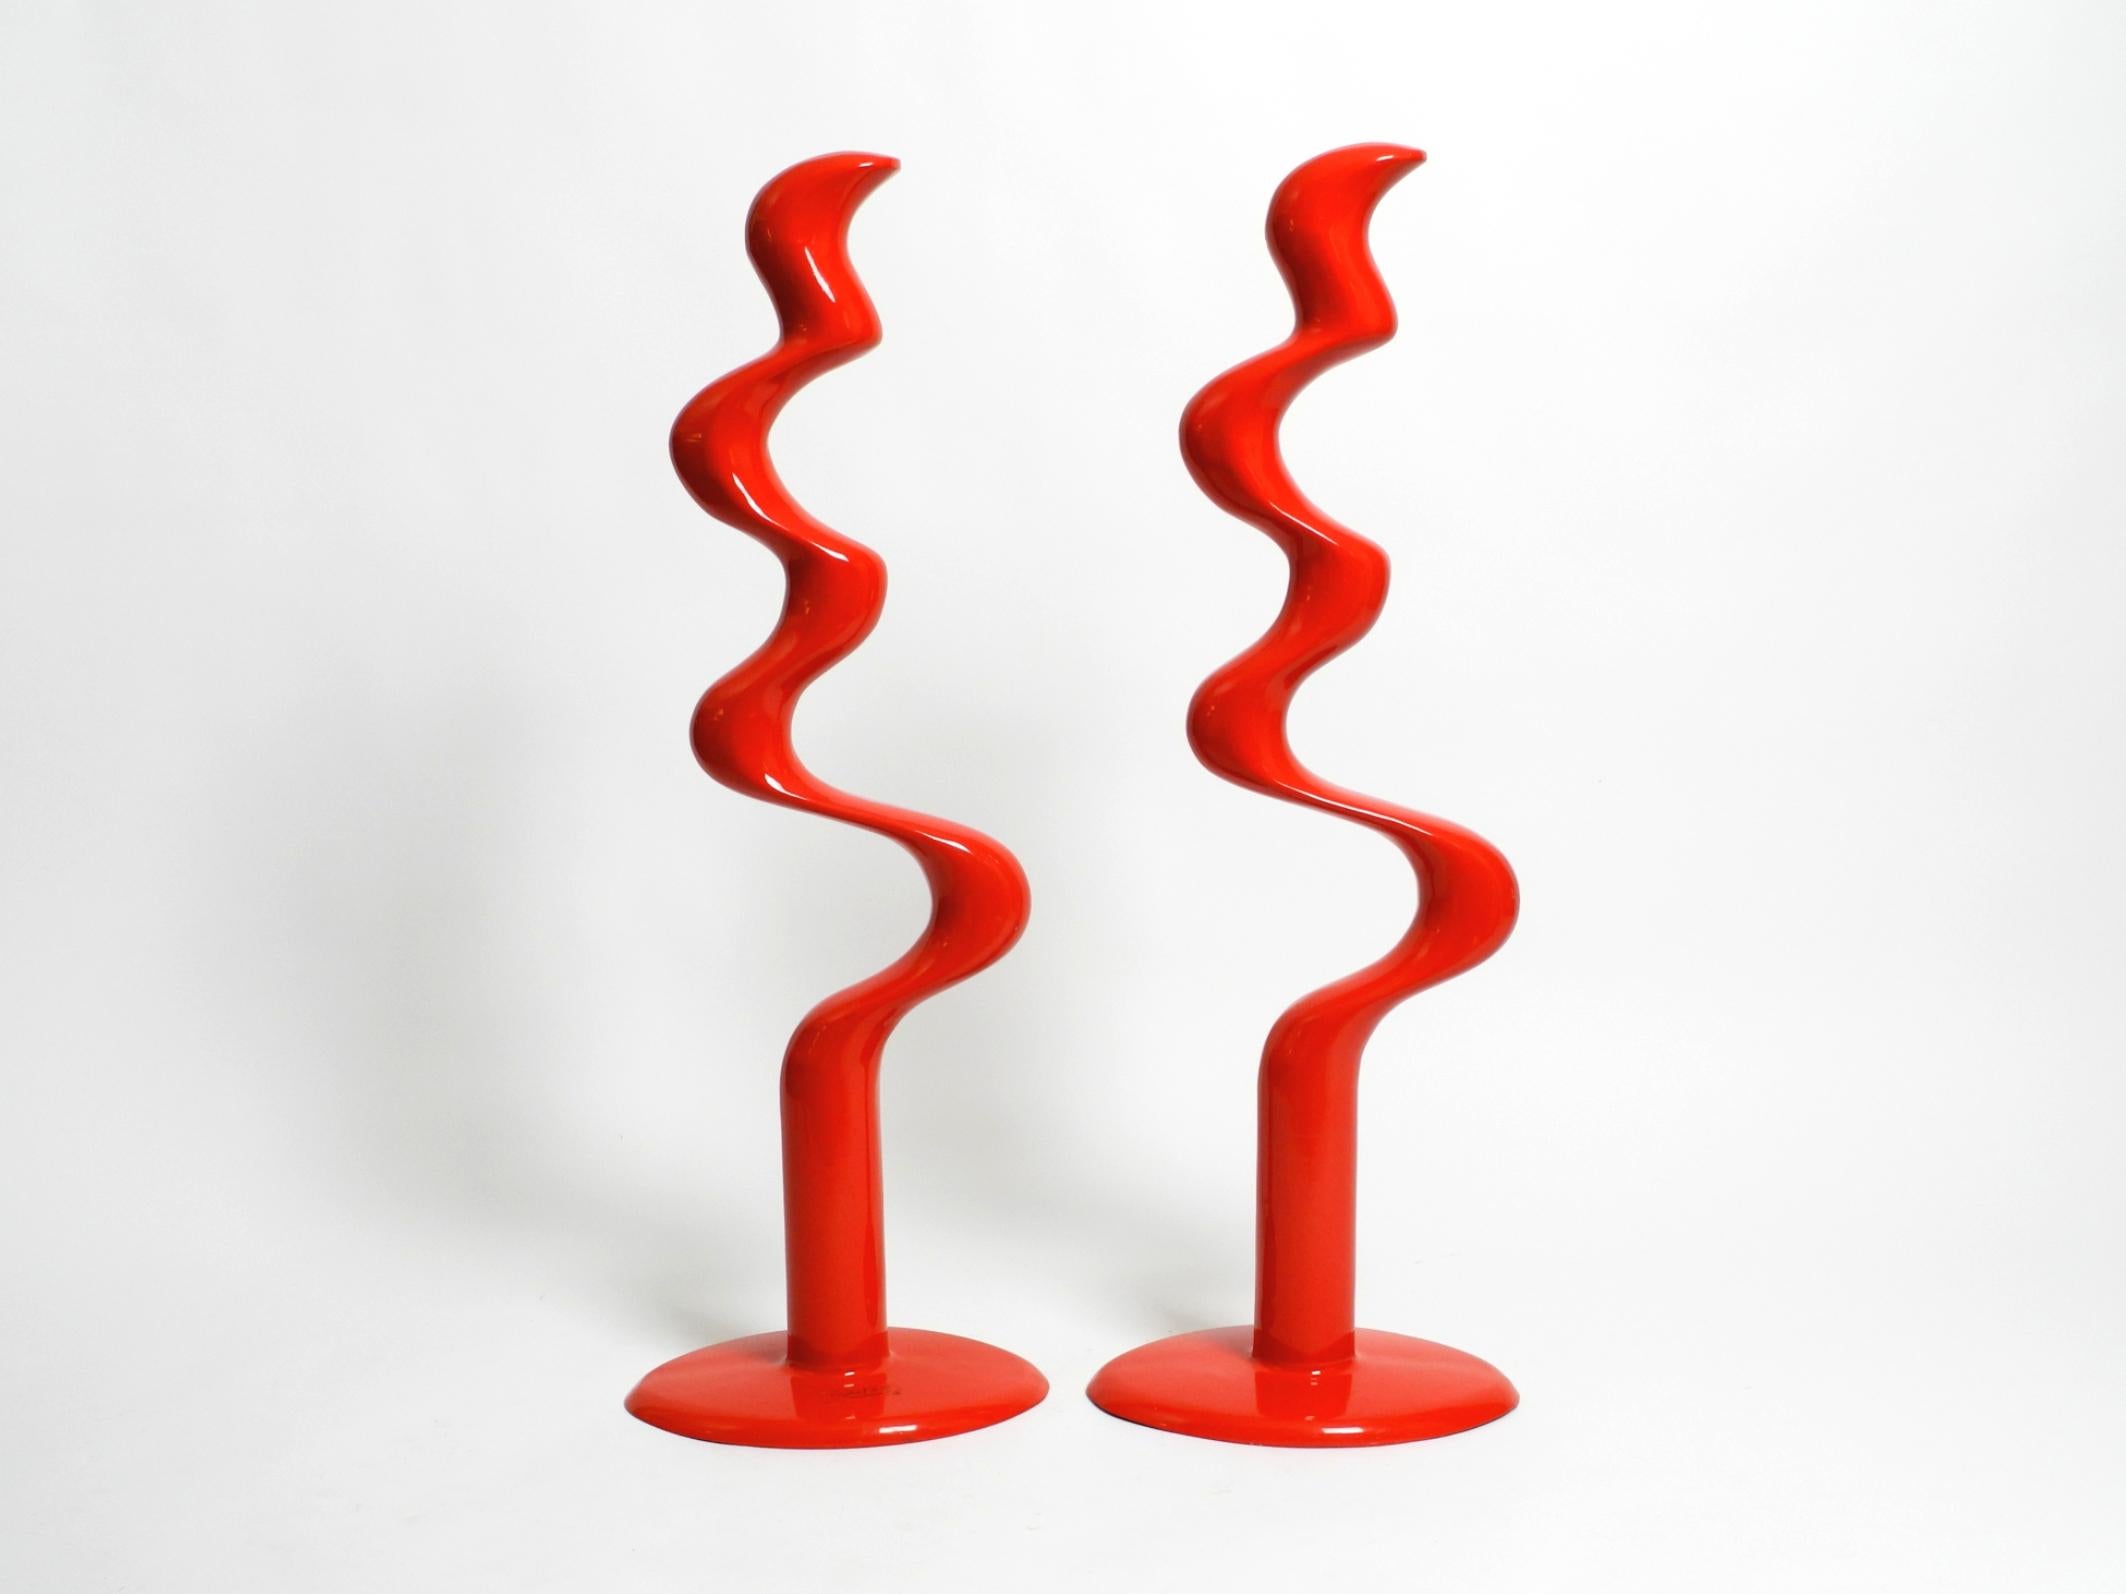 Pair of original limited abstract metal Ikea floor sculptures from 1990.
In good condition. Suitable for all living areas and very decorative.
Design by Tony Almén and Peter Gest. Ikea's well-known Stockholm-based design office.
A very unusual